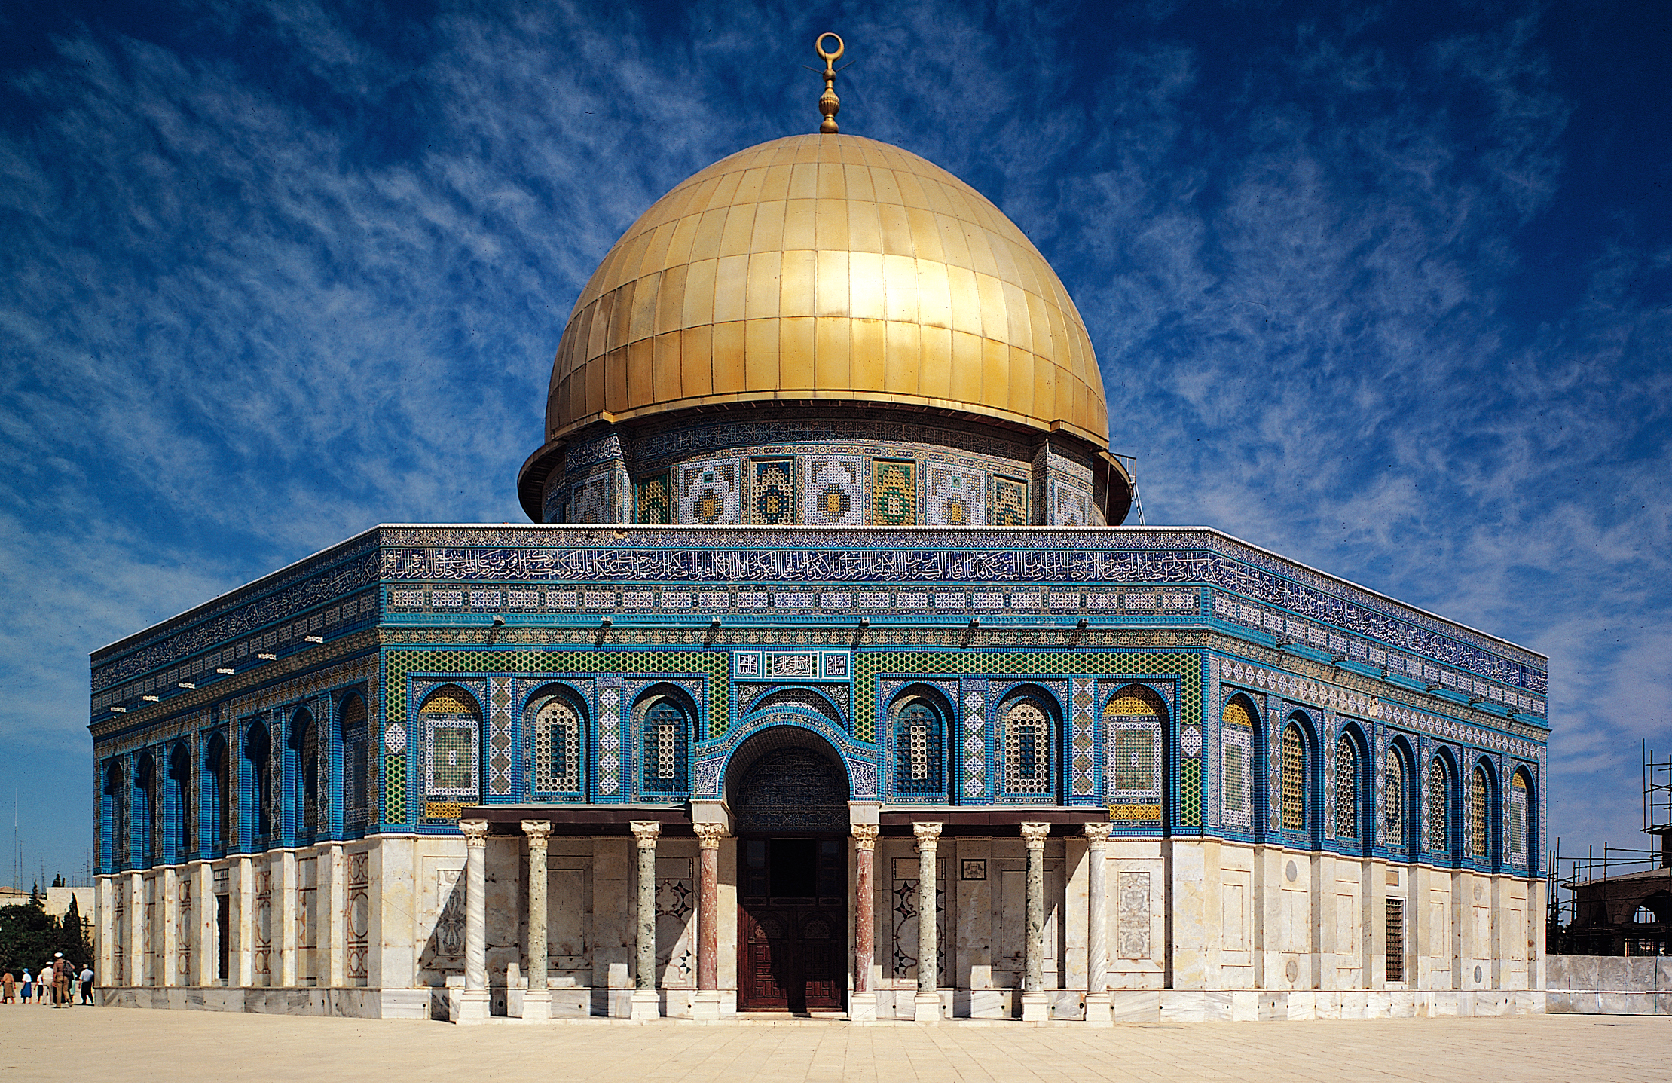 Al-Aqsa Mosque located in the Old City of Jerusalem